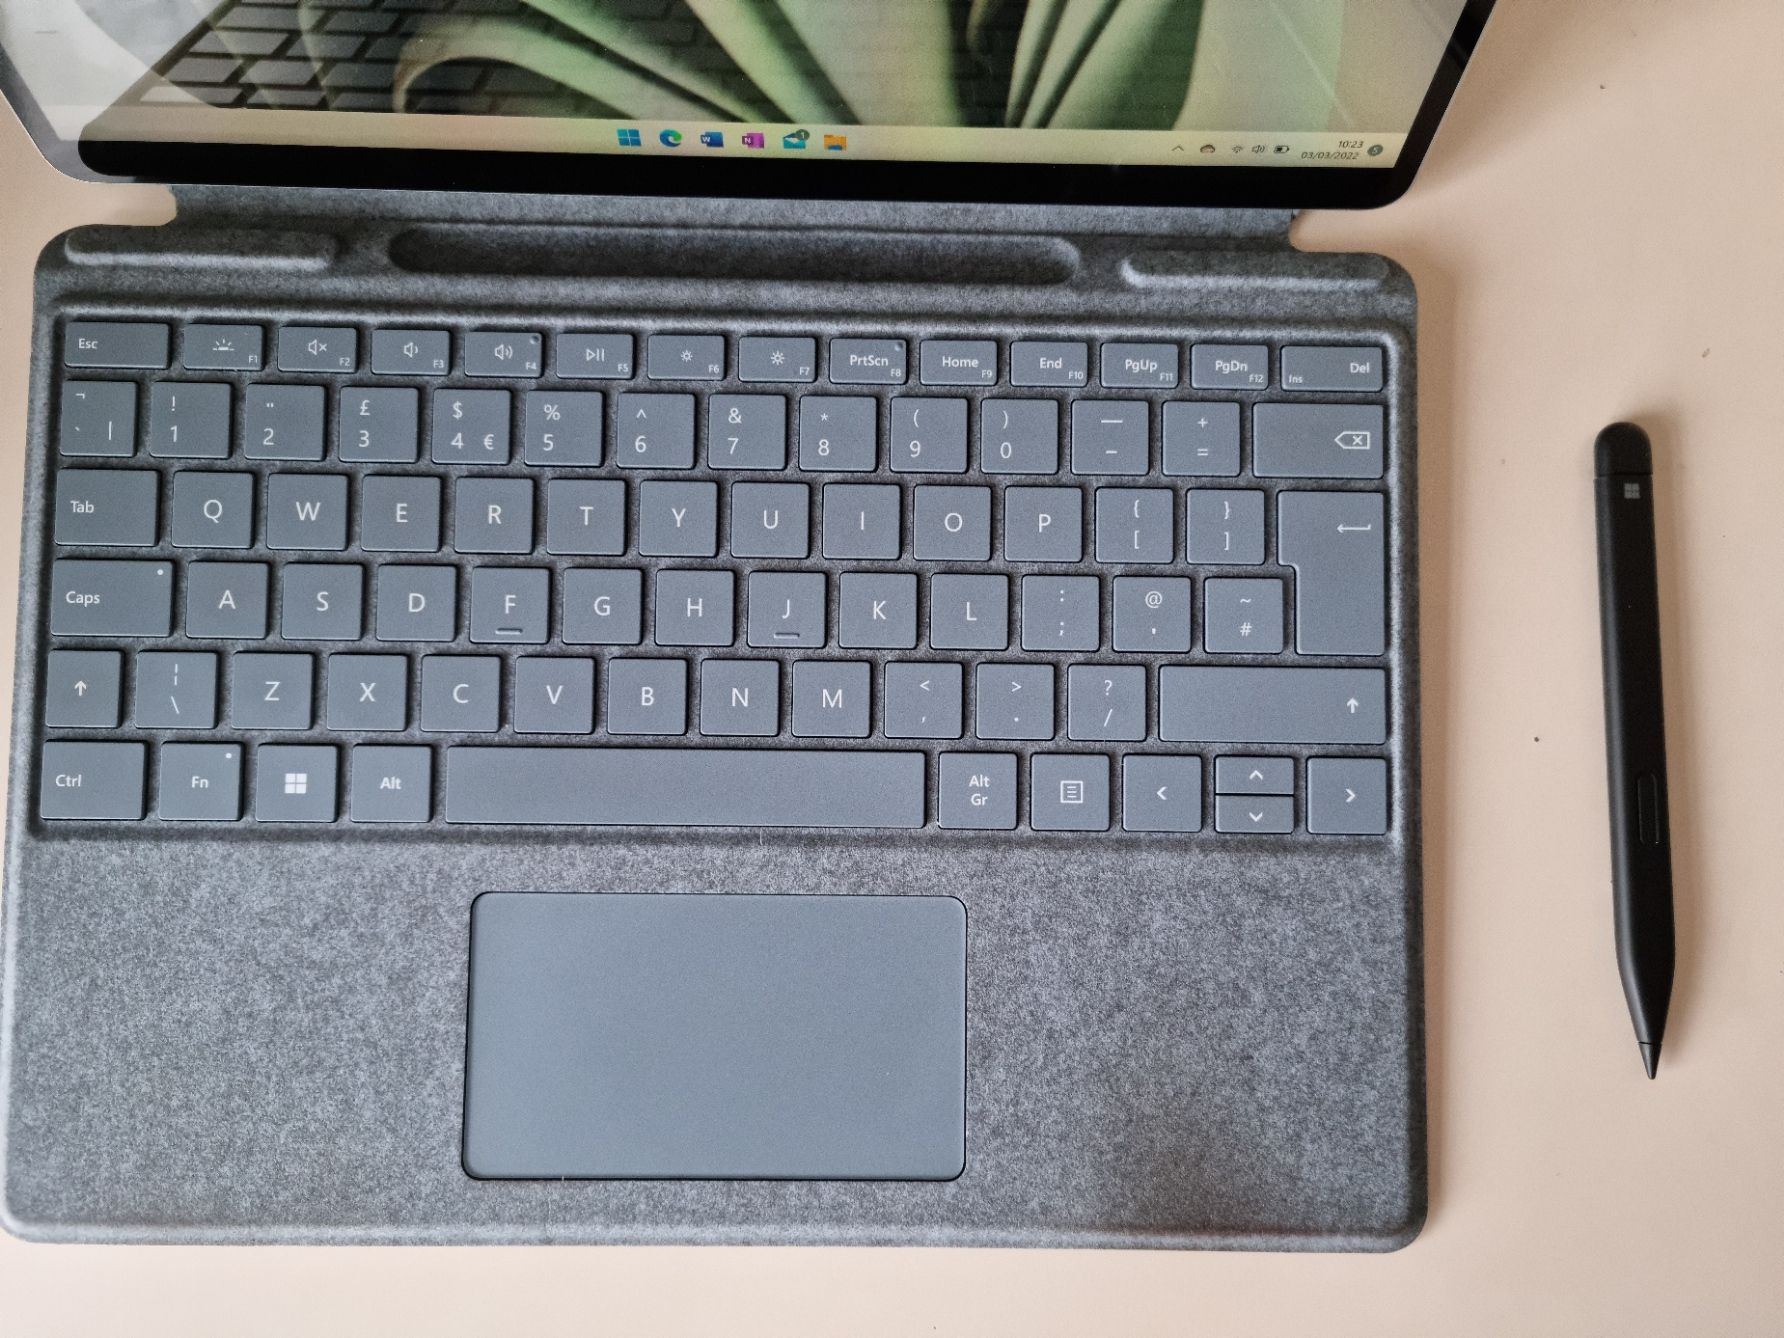 keyboard and slim pen of surface pro next to each other